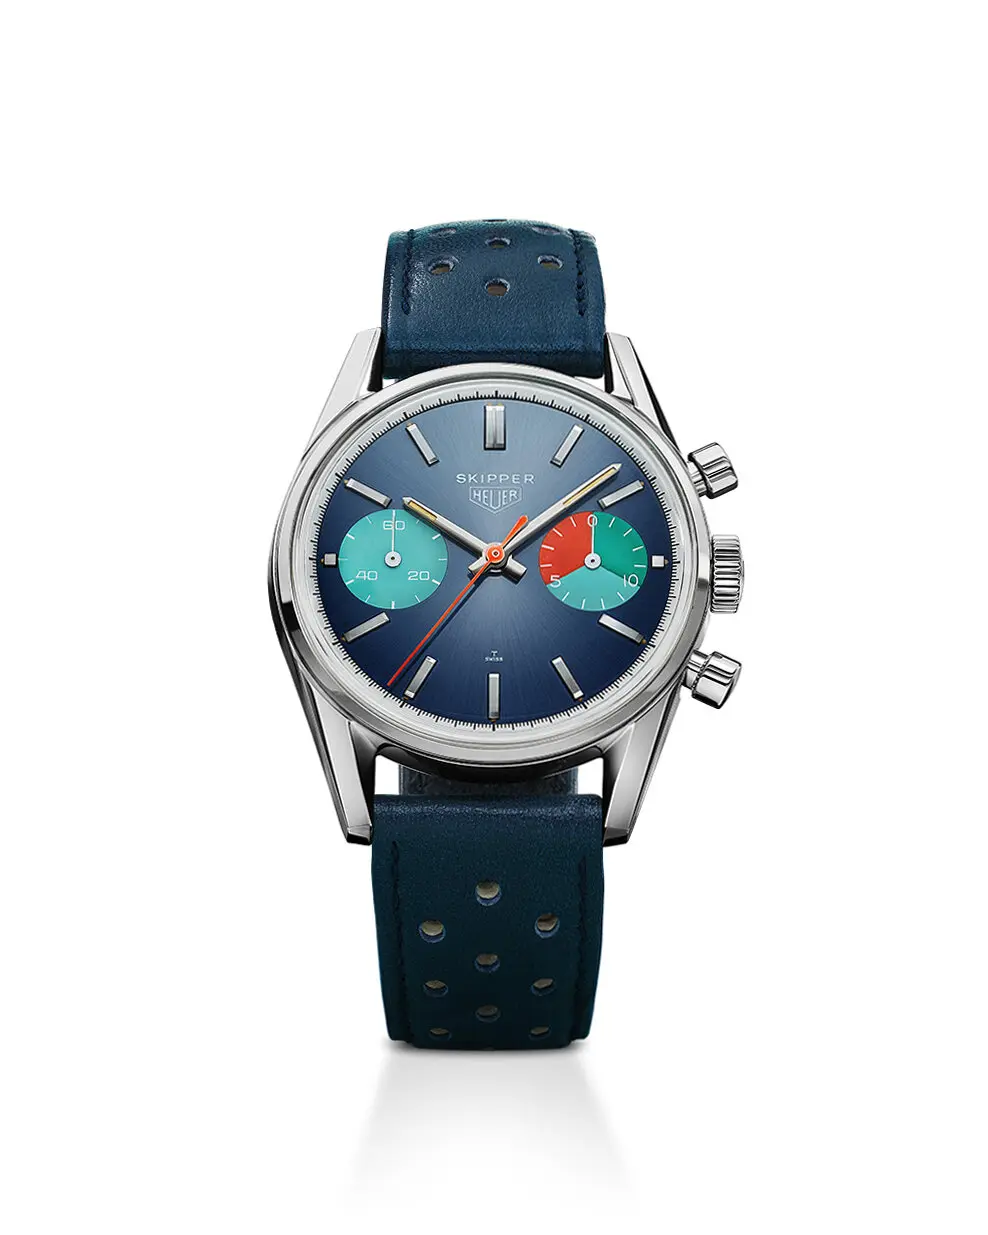 A Classic 1:1 Replica TAG Heuer Yachting Watch Gets a Second Wind